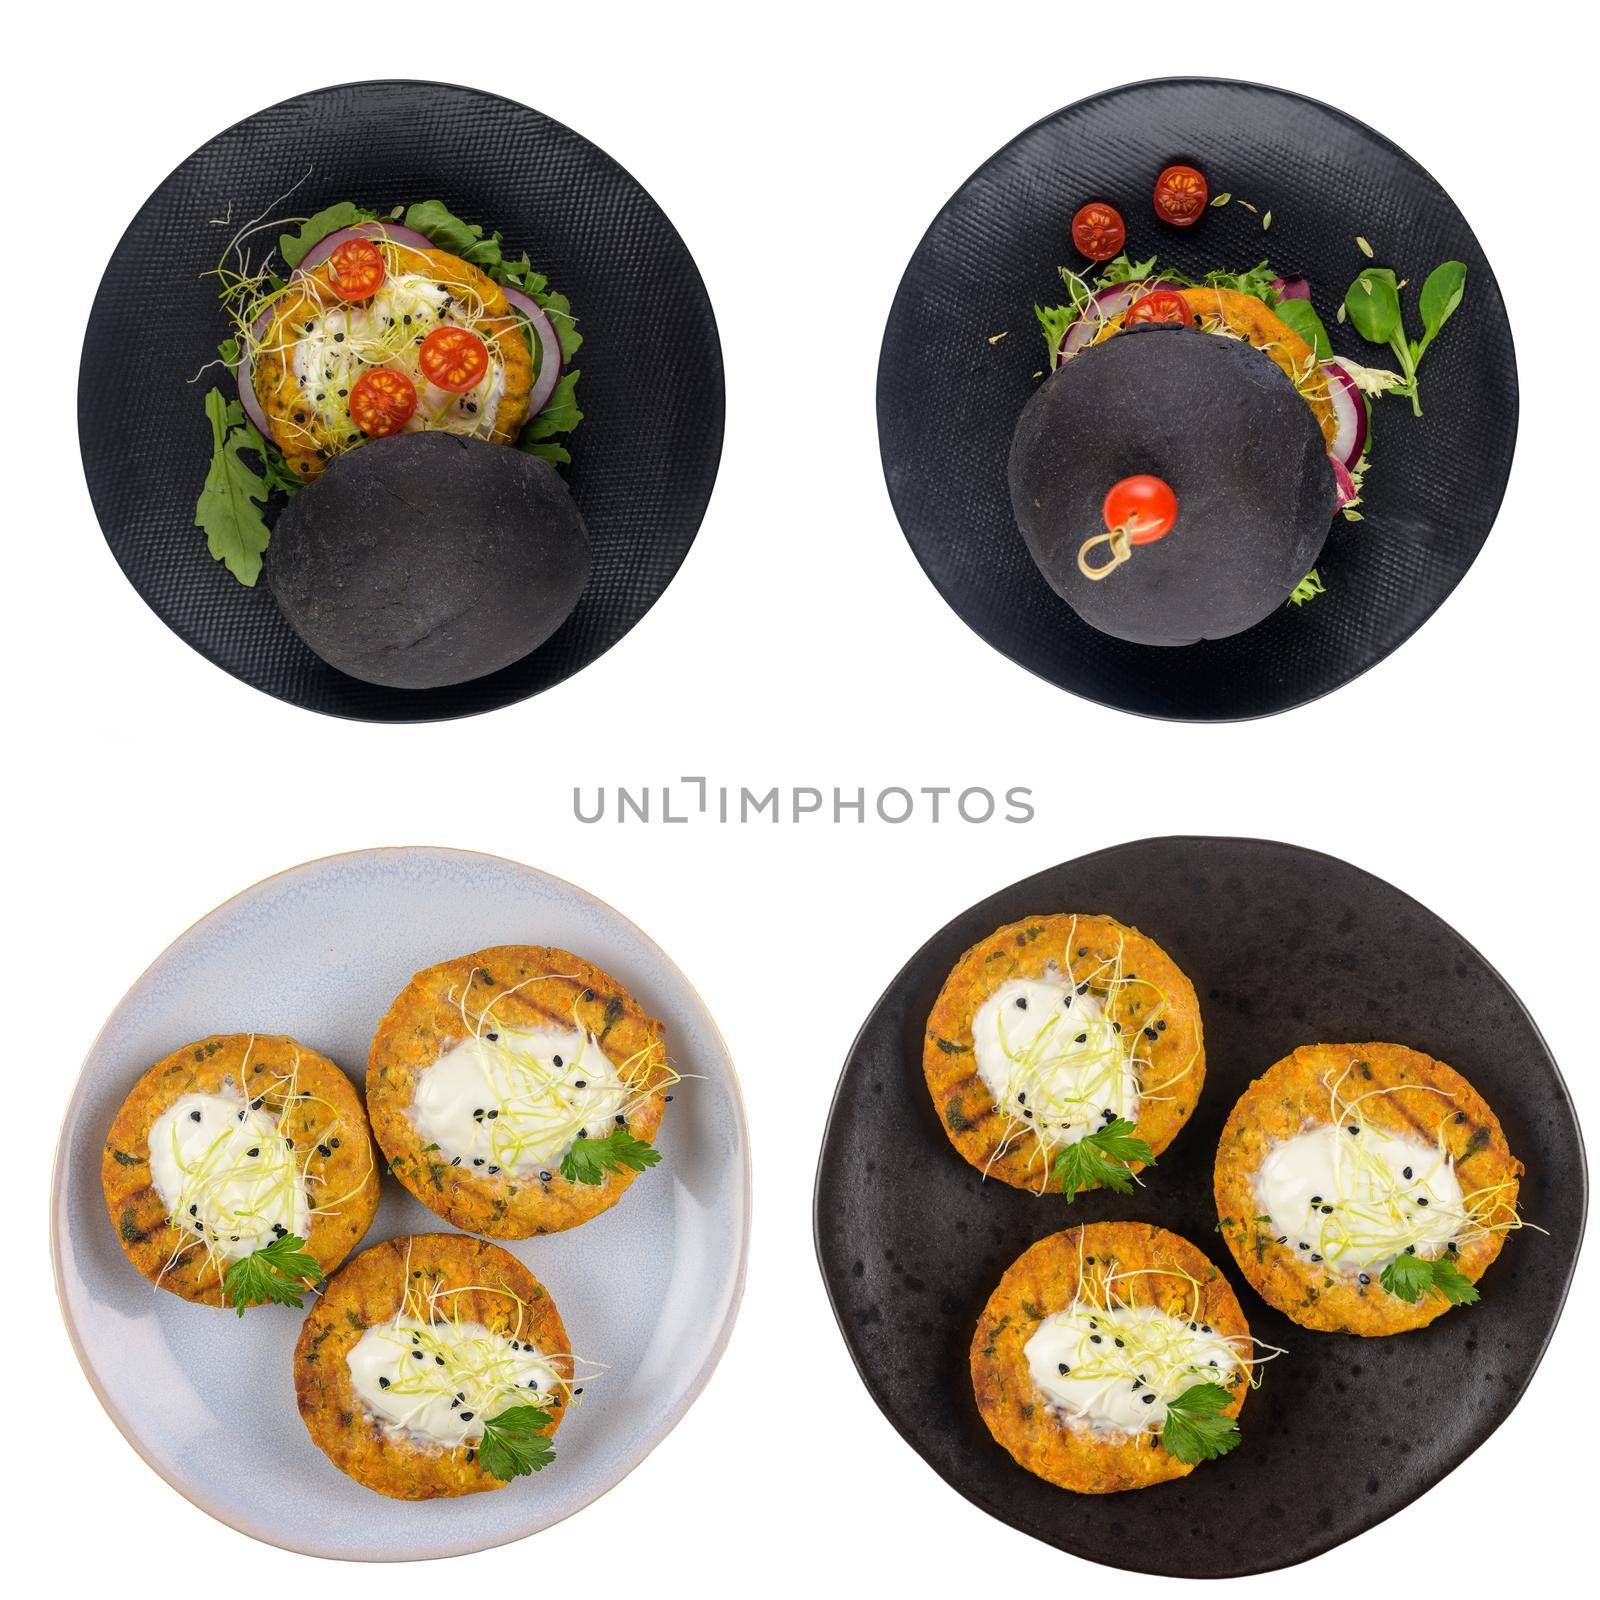 Grilled veggie burgers with chickpeas and vegetables and parsley leaves on ceramic plate isolated on white background.